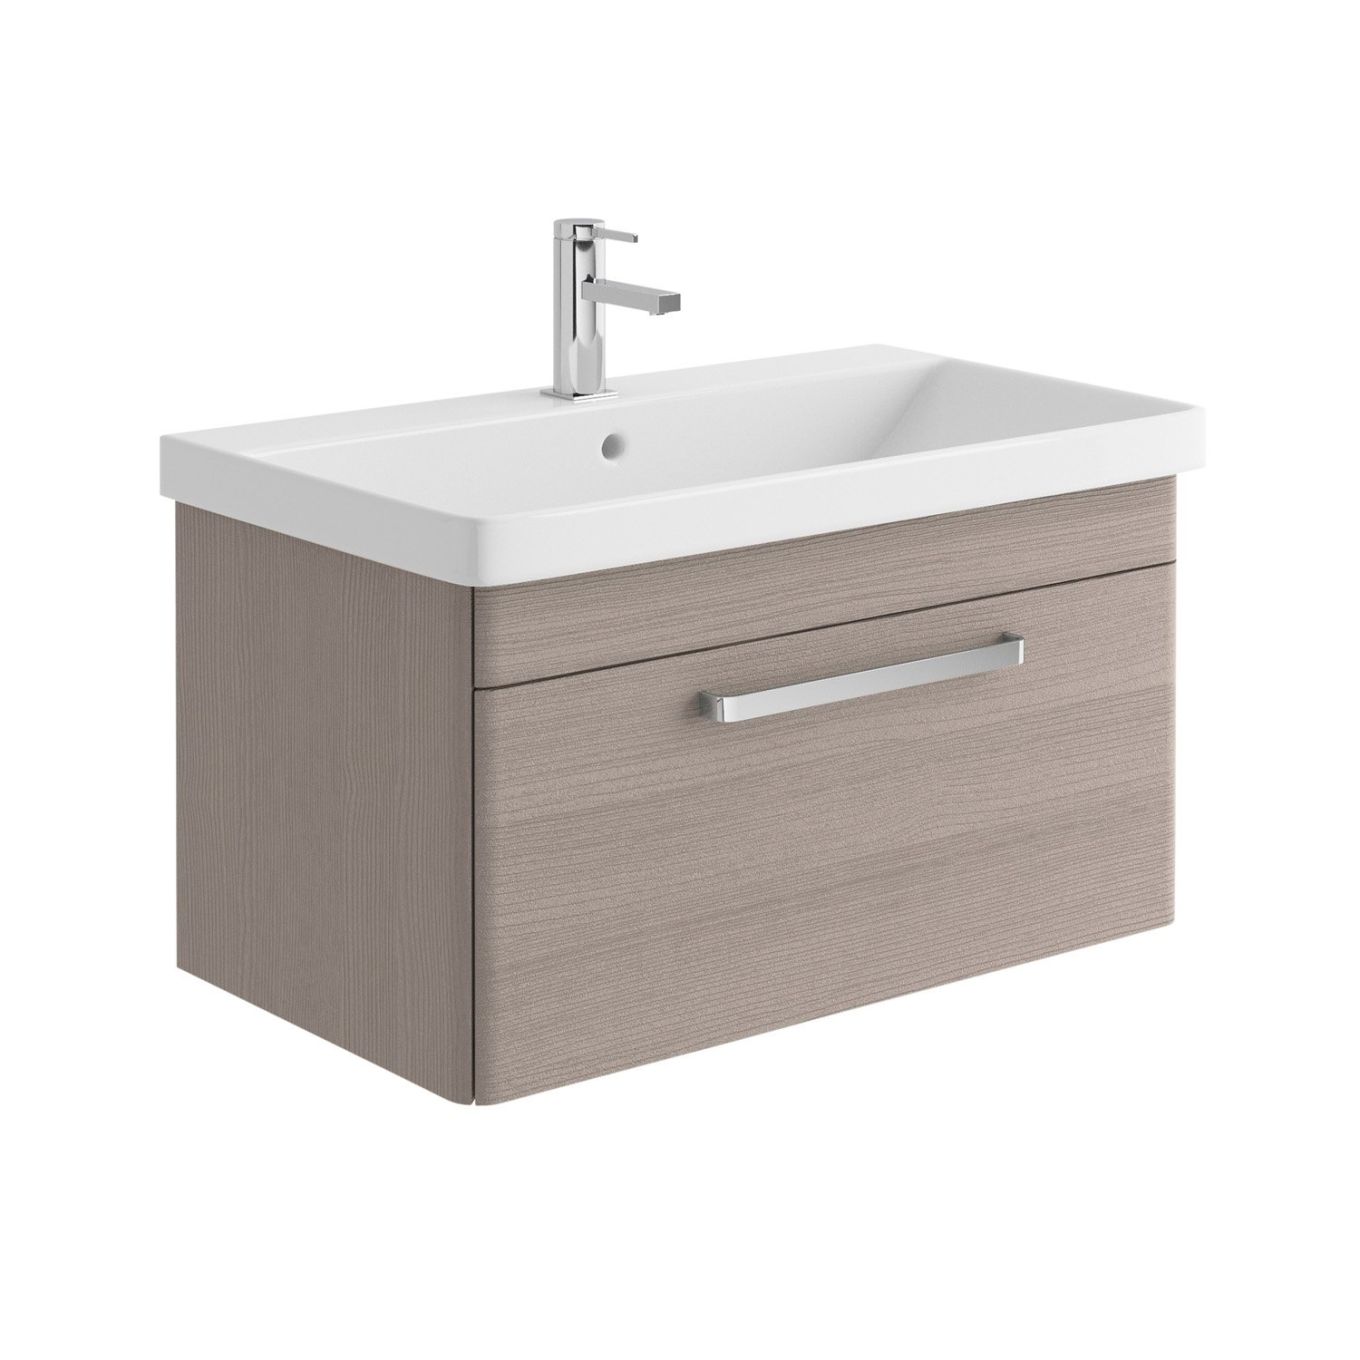 800mm Wall Mounted Vanity Unit & Basin in Stone Grey